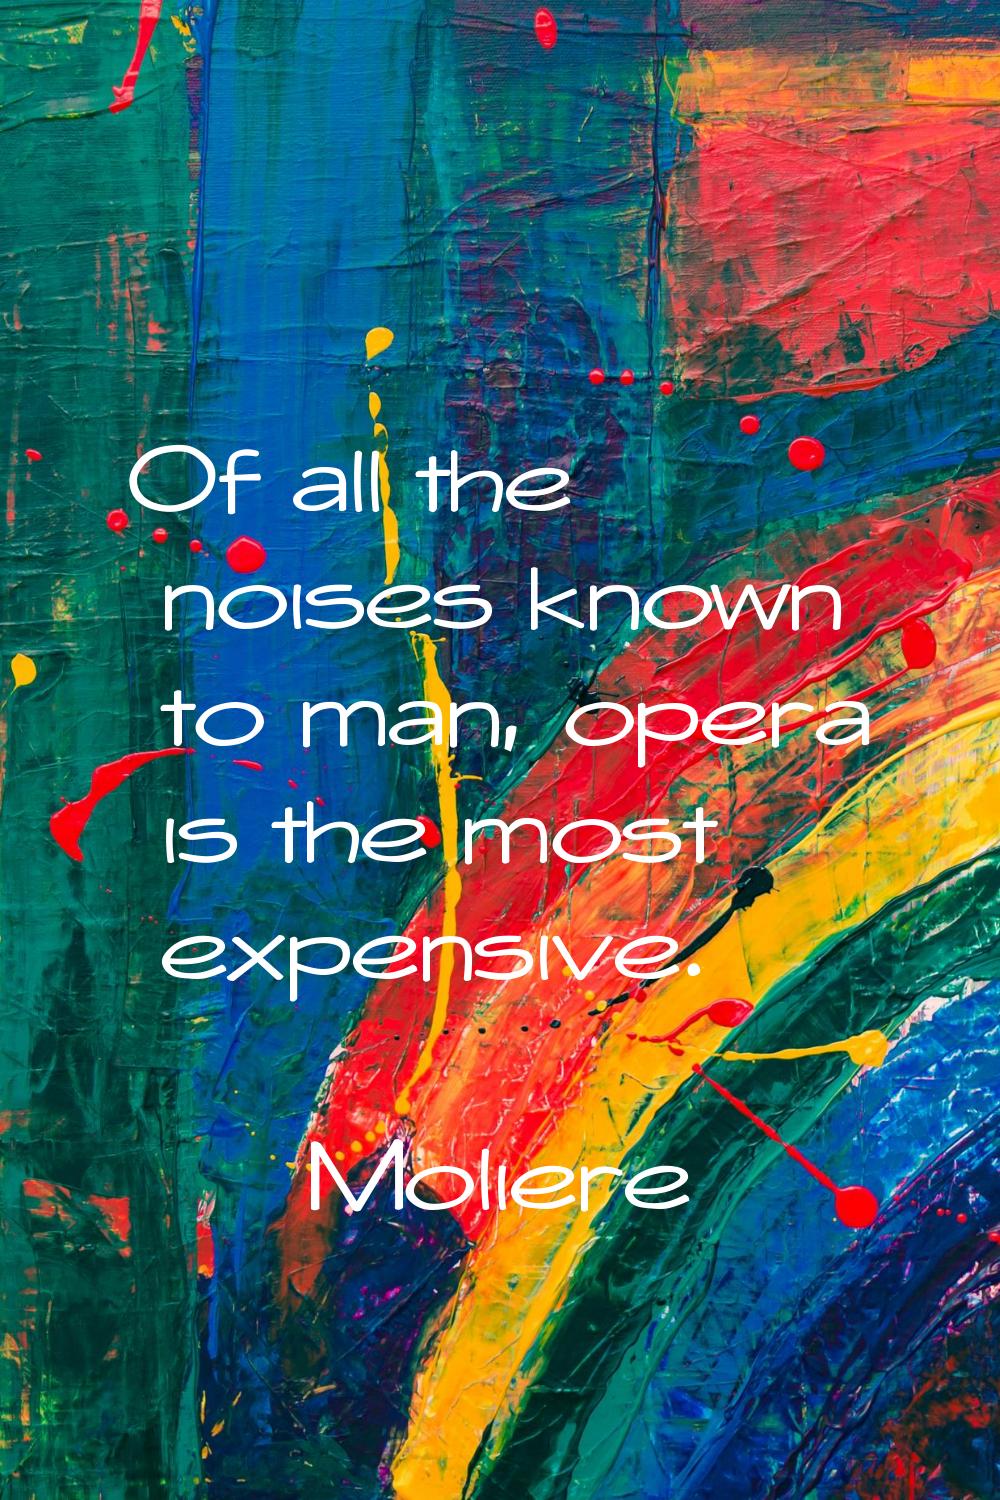 Of all the noises known to man, opera is the most expensive.